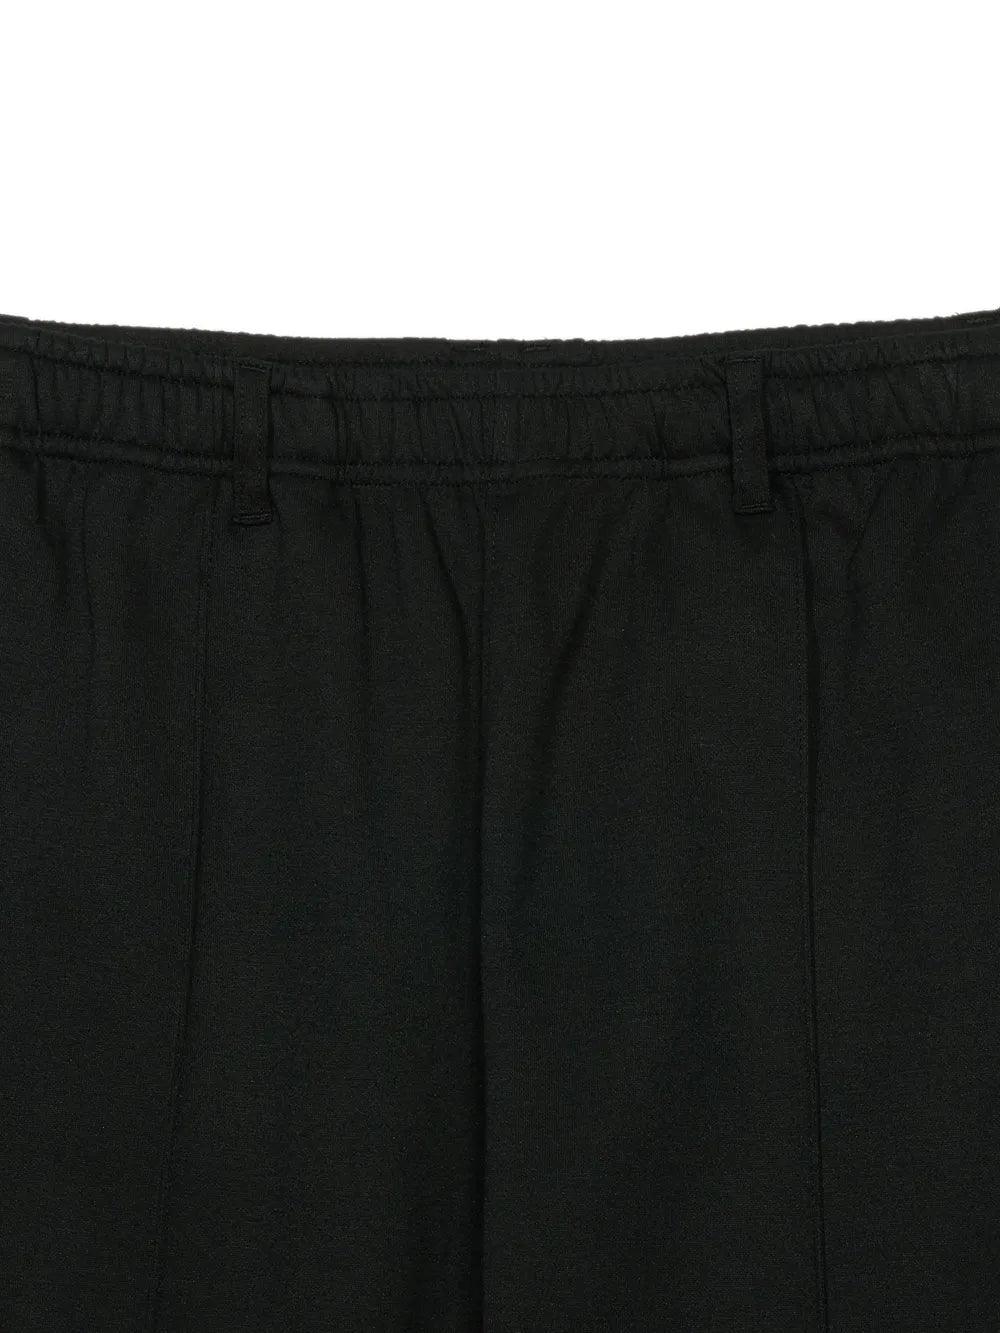 Partimento Taping Line Jersey Track Pants - Black - Pants